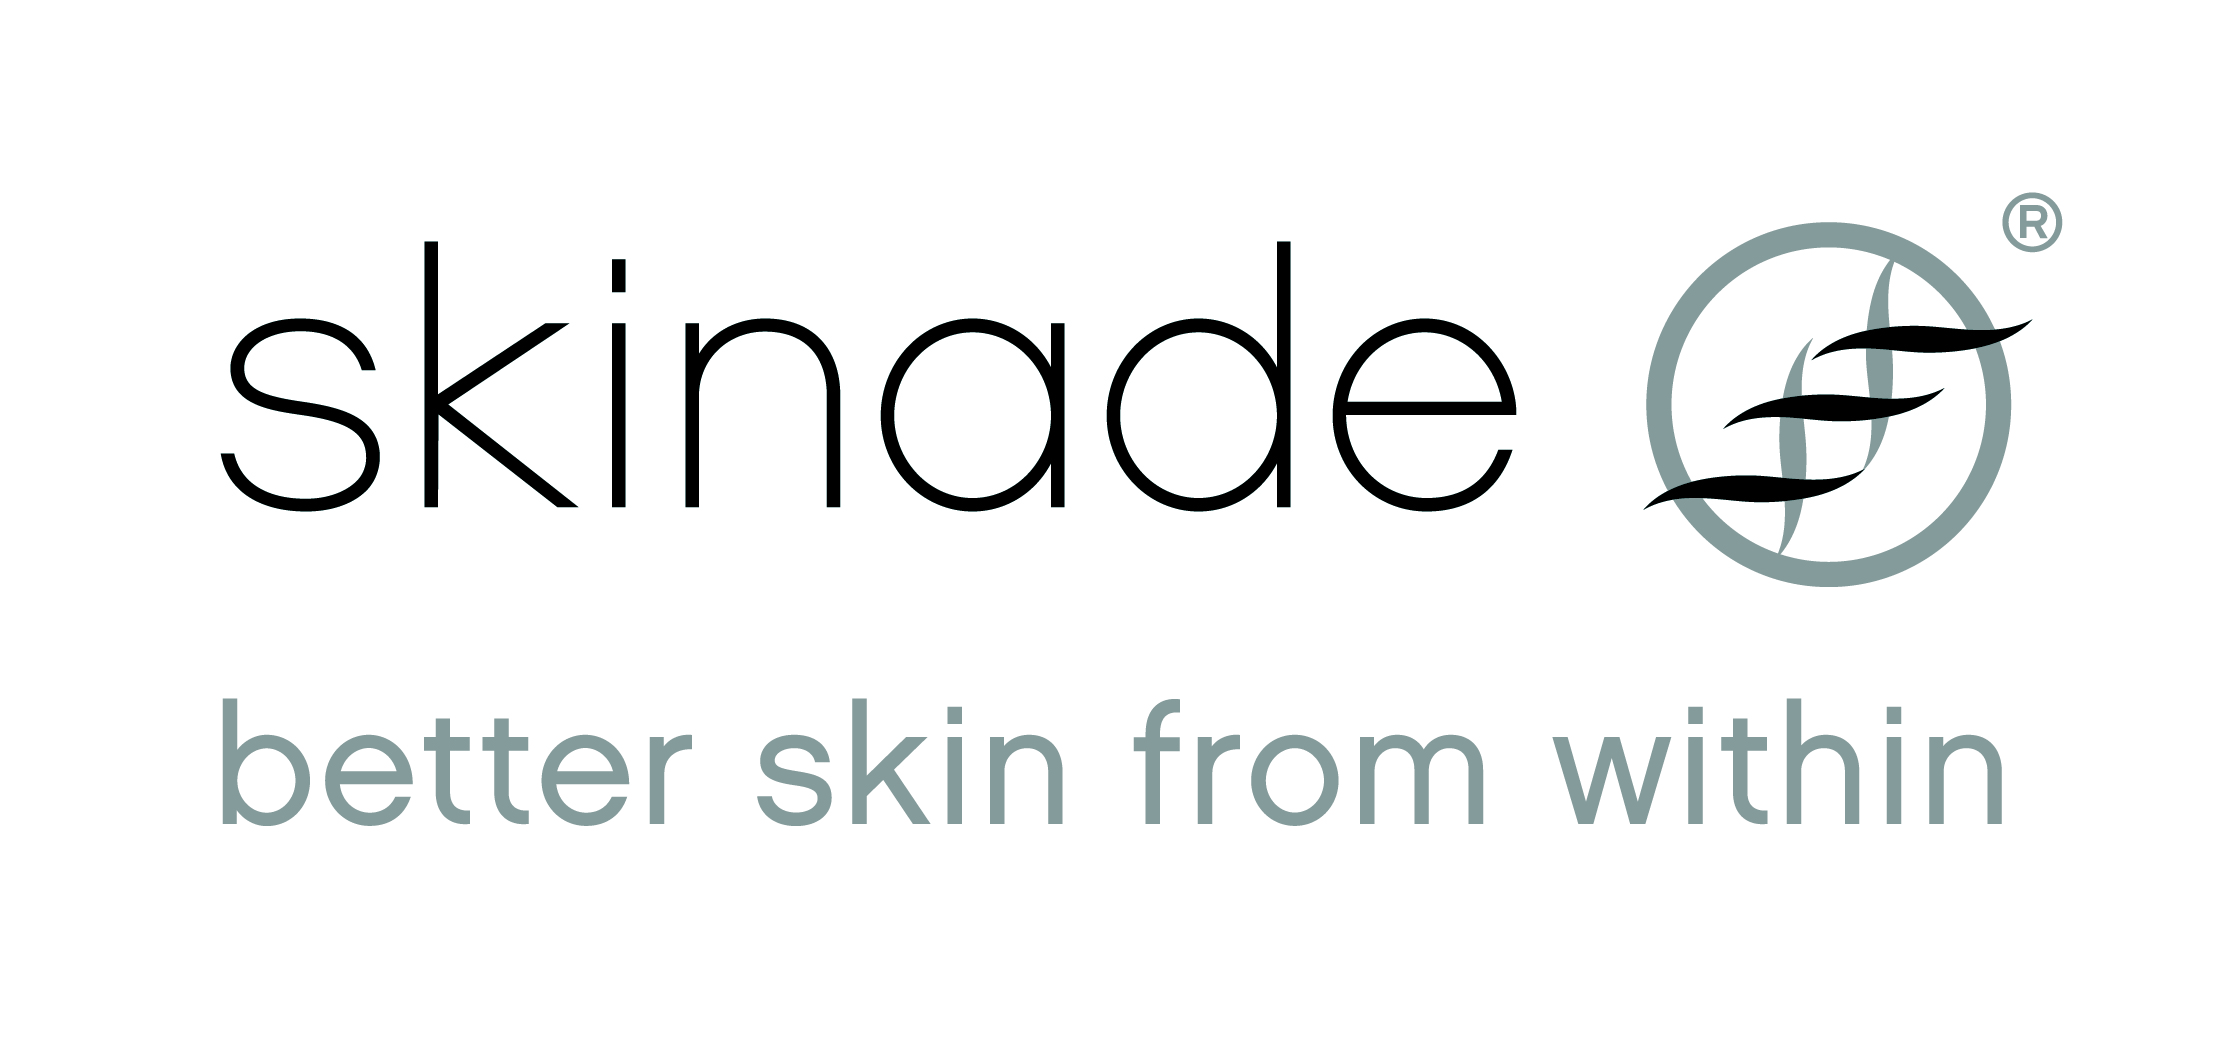 skinade - better skin from within